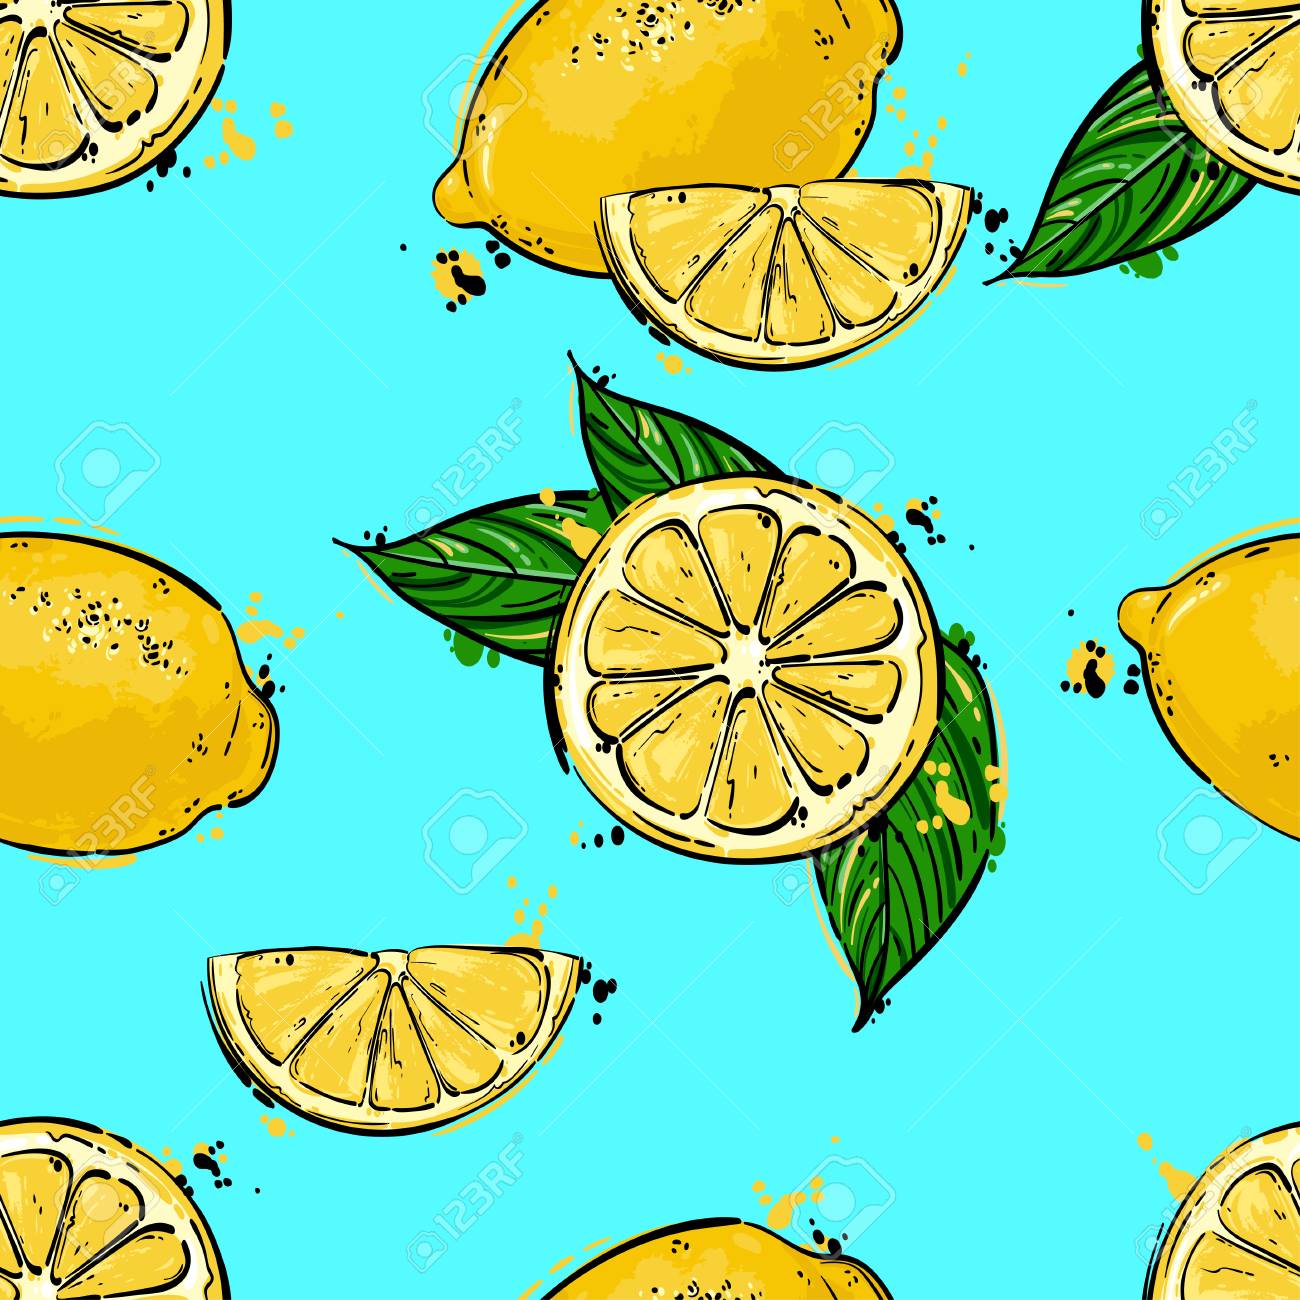 Free download Abstract Pattern With Lemons Background For The Design Of ...